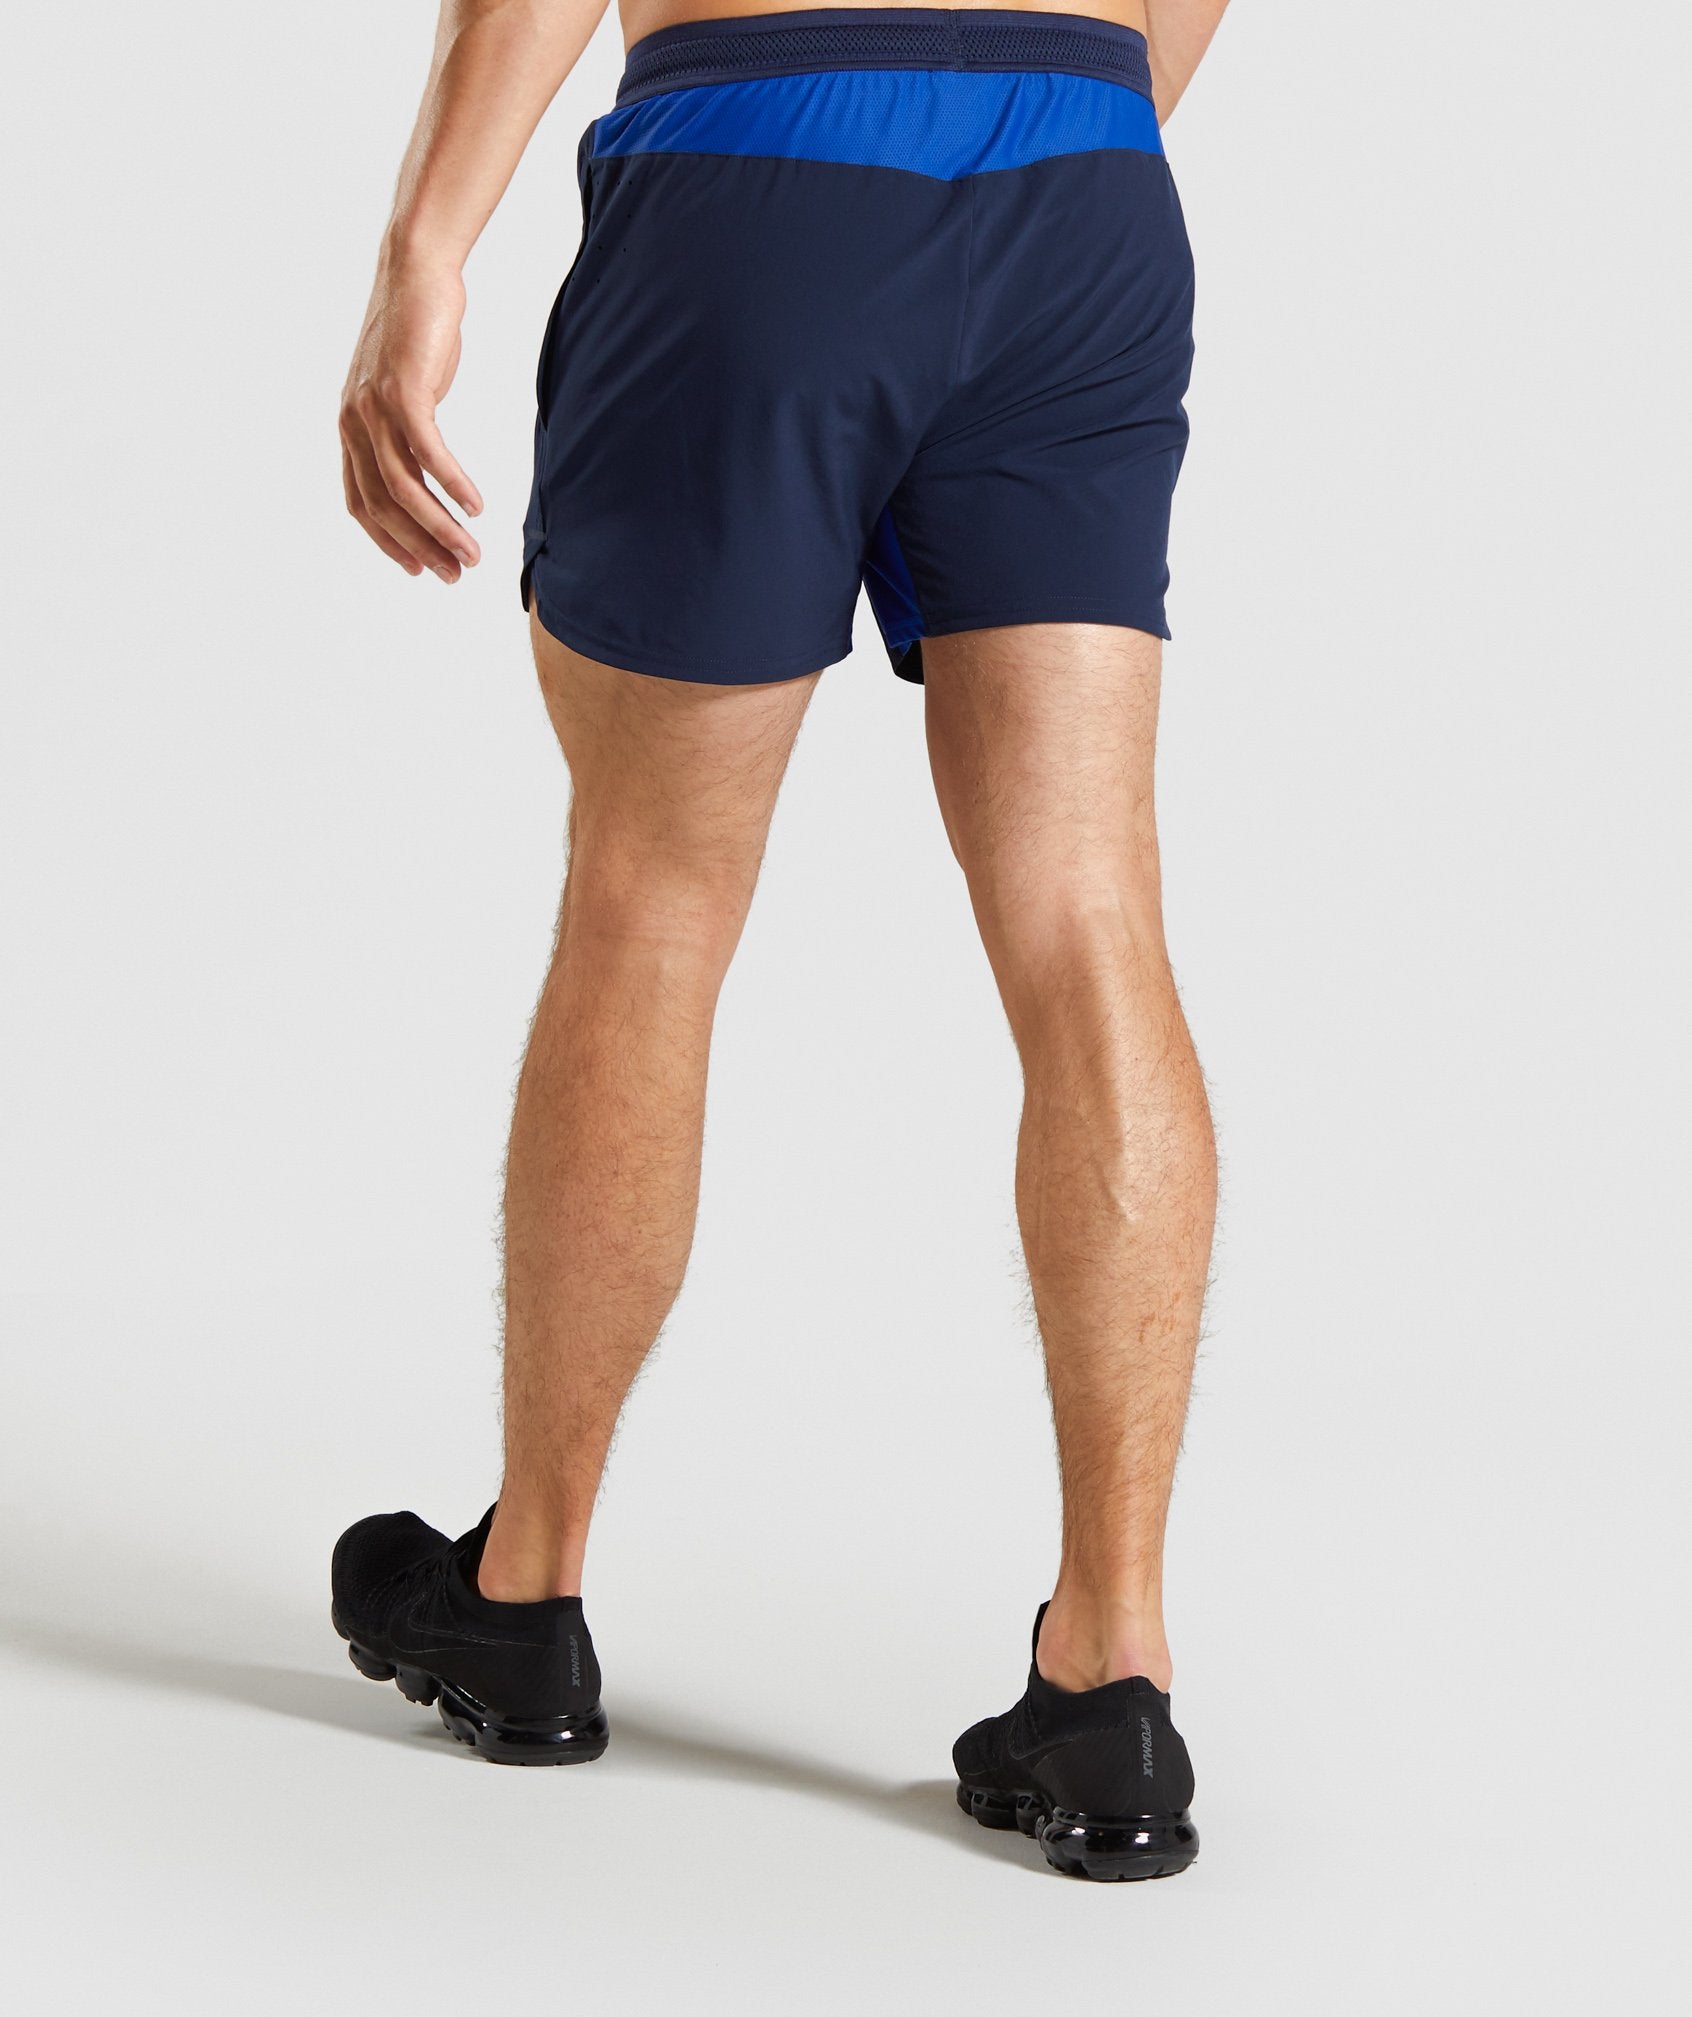 Speed Shorts in Blue - view 2